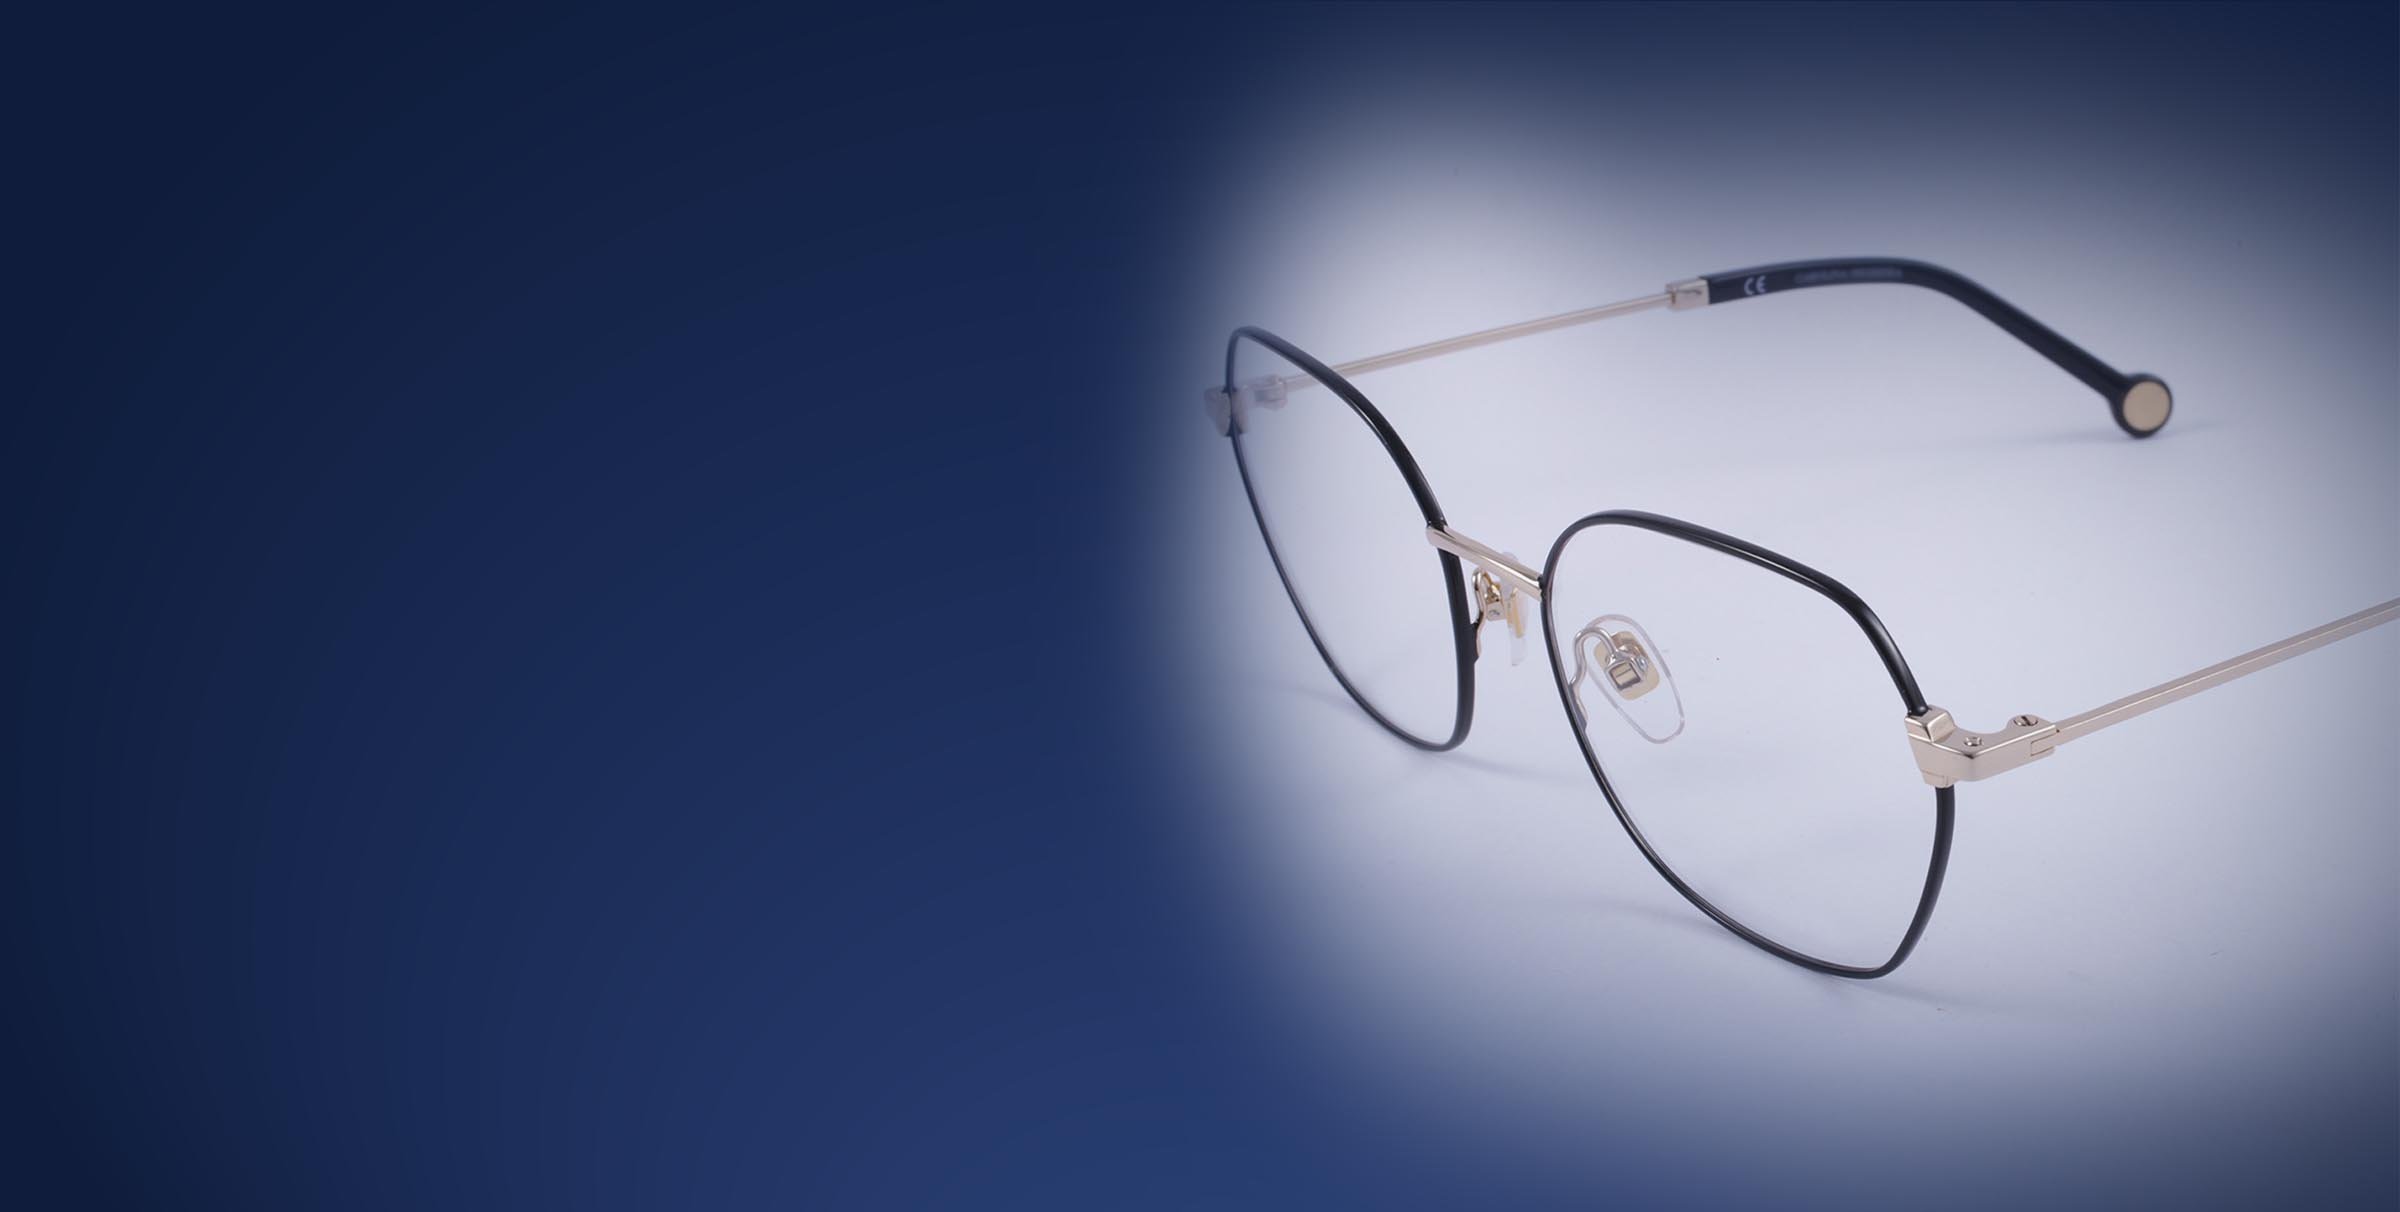 HQ eyeglasses pictures for eyewear ecommerce